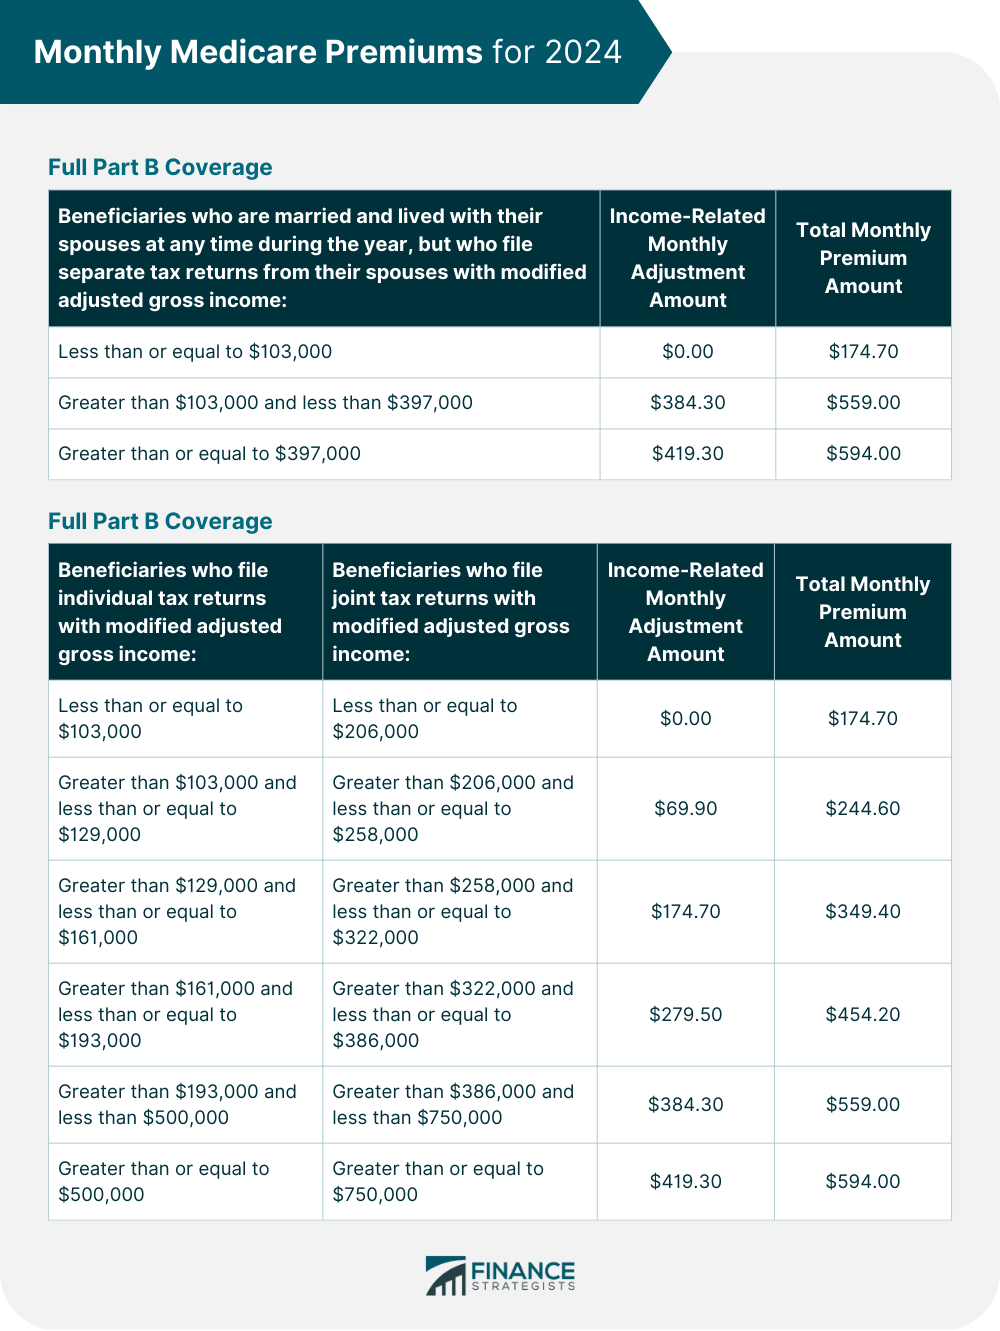 Monthly Medicare Premiums for 2024